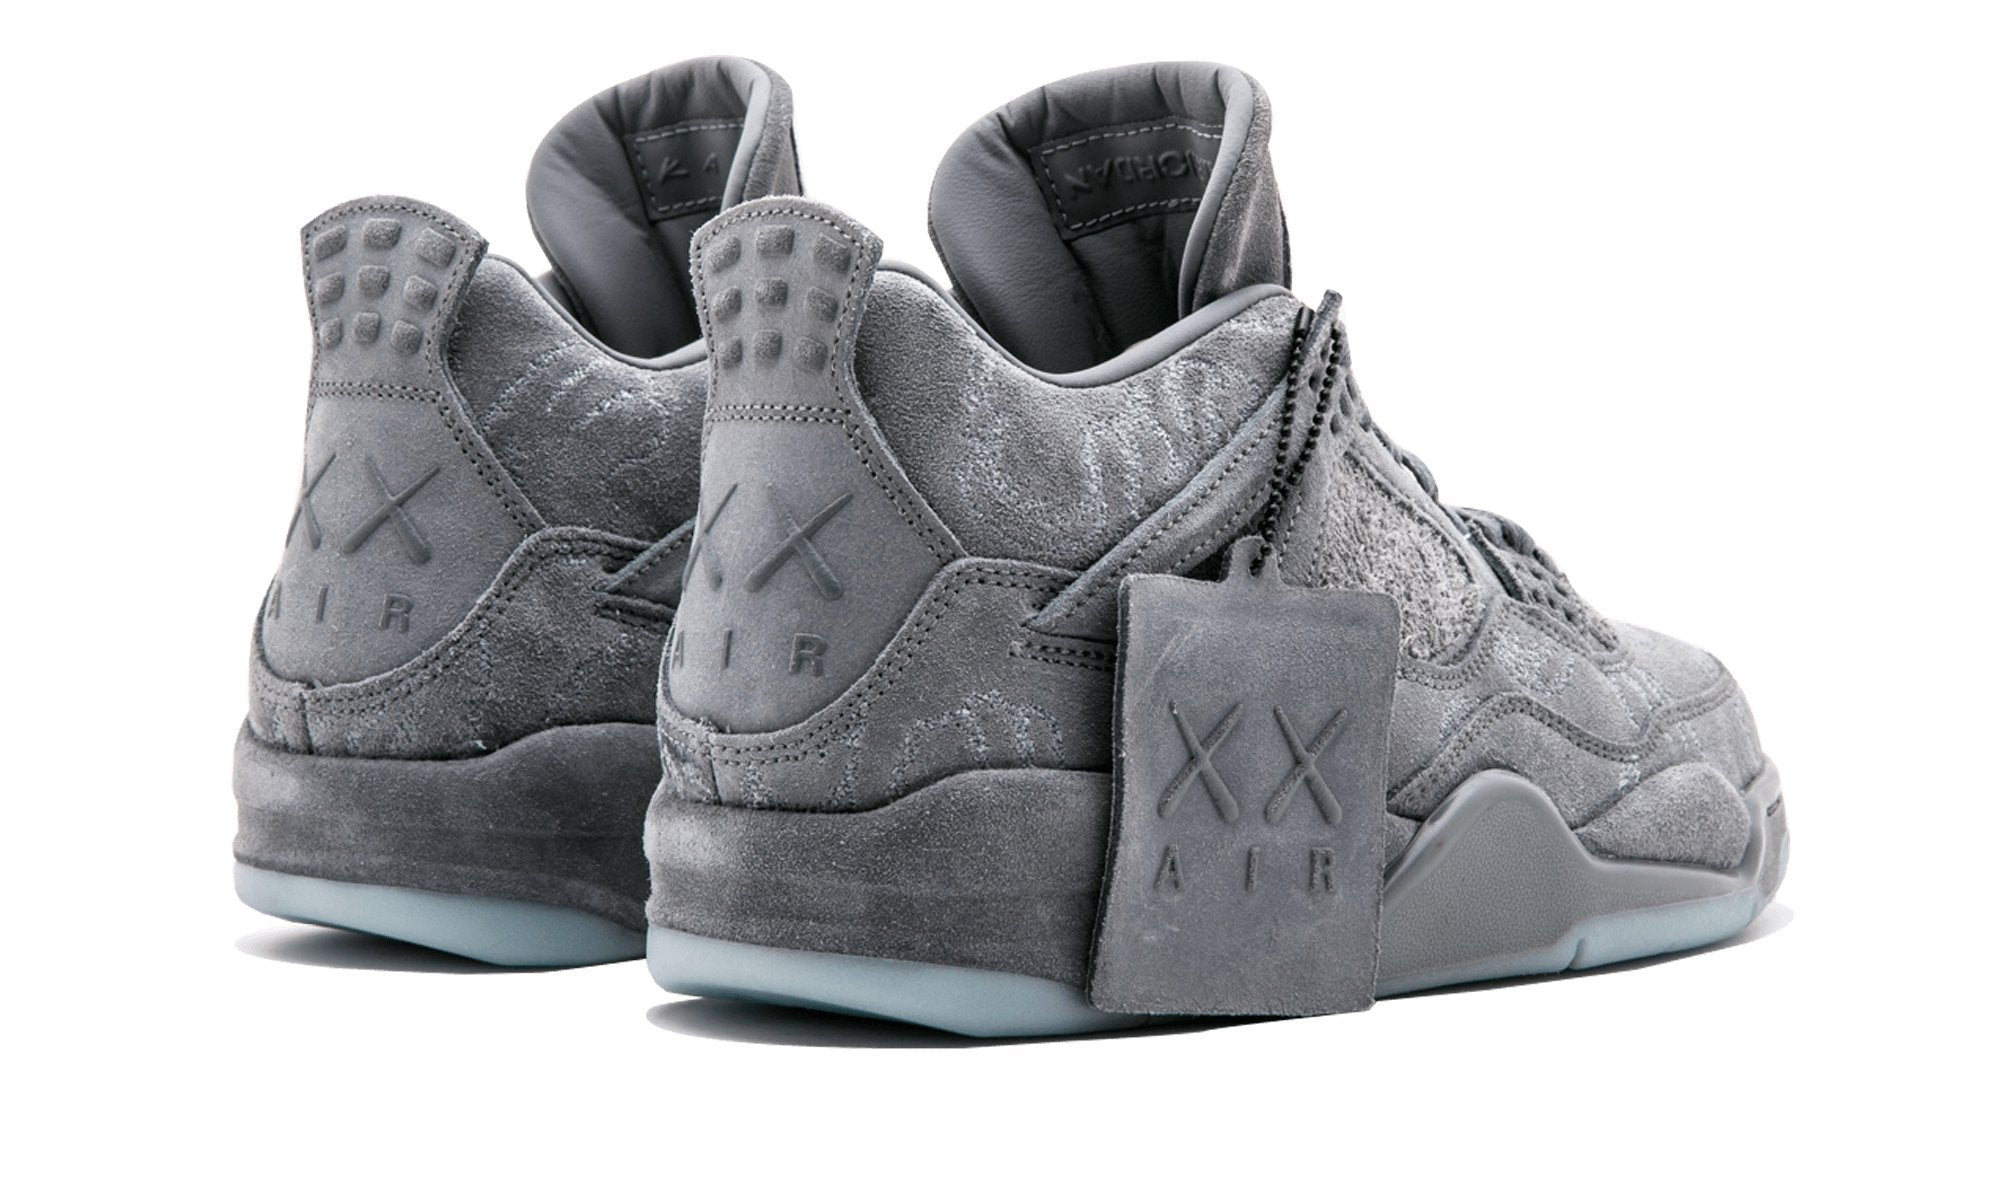 Jordan 4 Retro Limited Edition Kaws Sneakers Very Rare - 930155 003 - Caps Fitted Caps Fitted Jordan